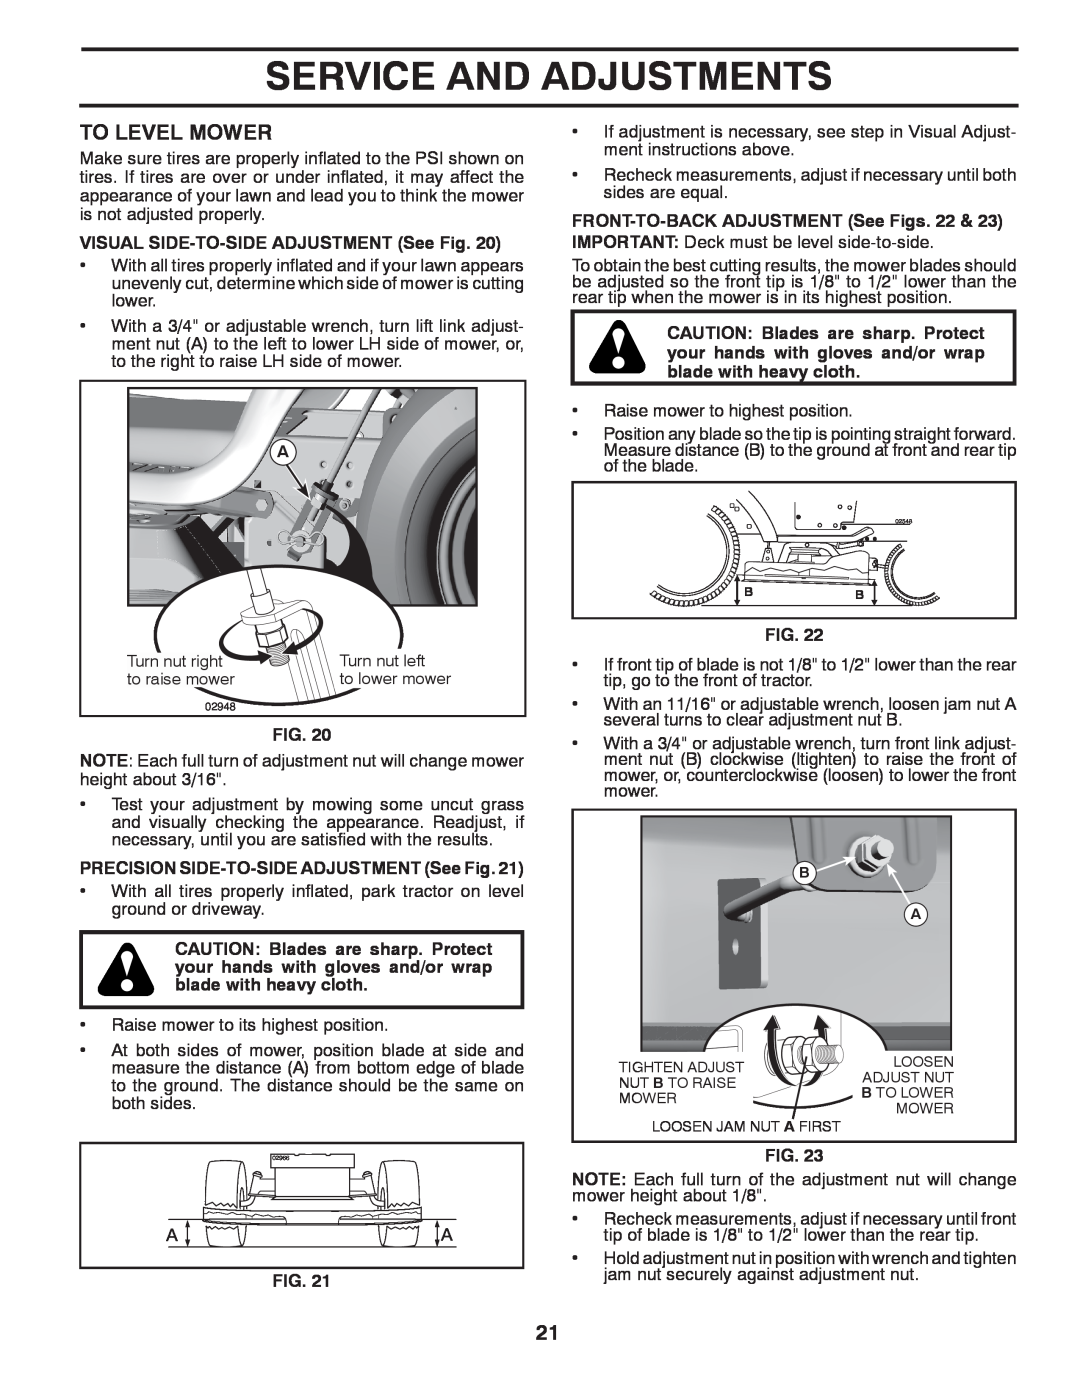 McCulloch M19542H manual To Level Mower, Service And Adjustments, VISUAL SIDE-TO-SIDEADJUSTMENT See Fig 